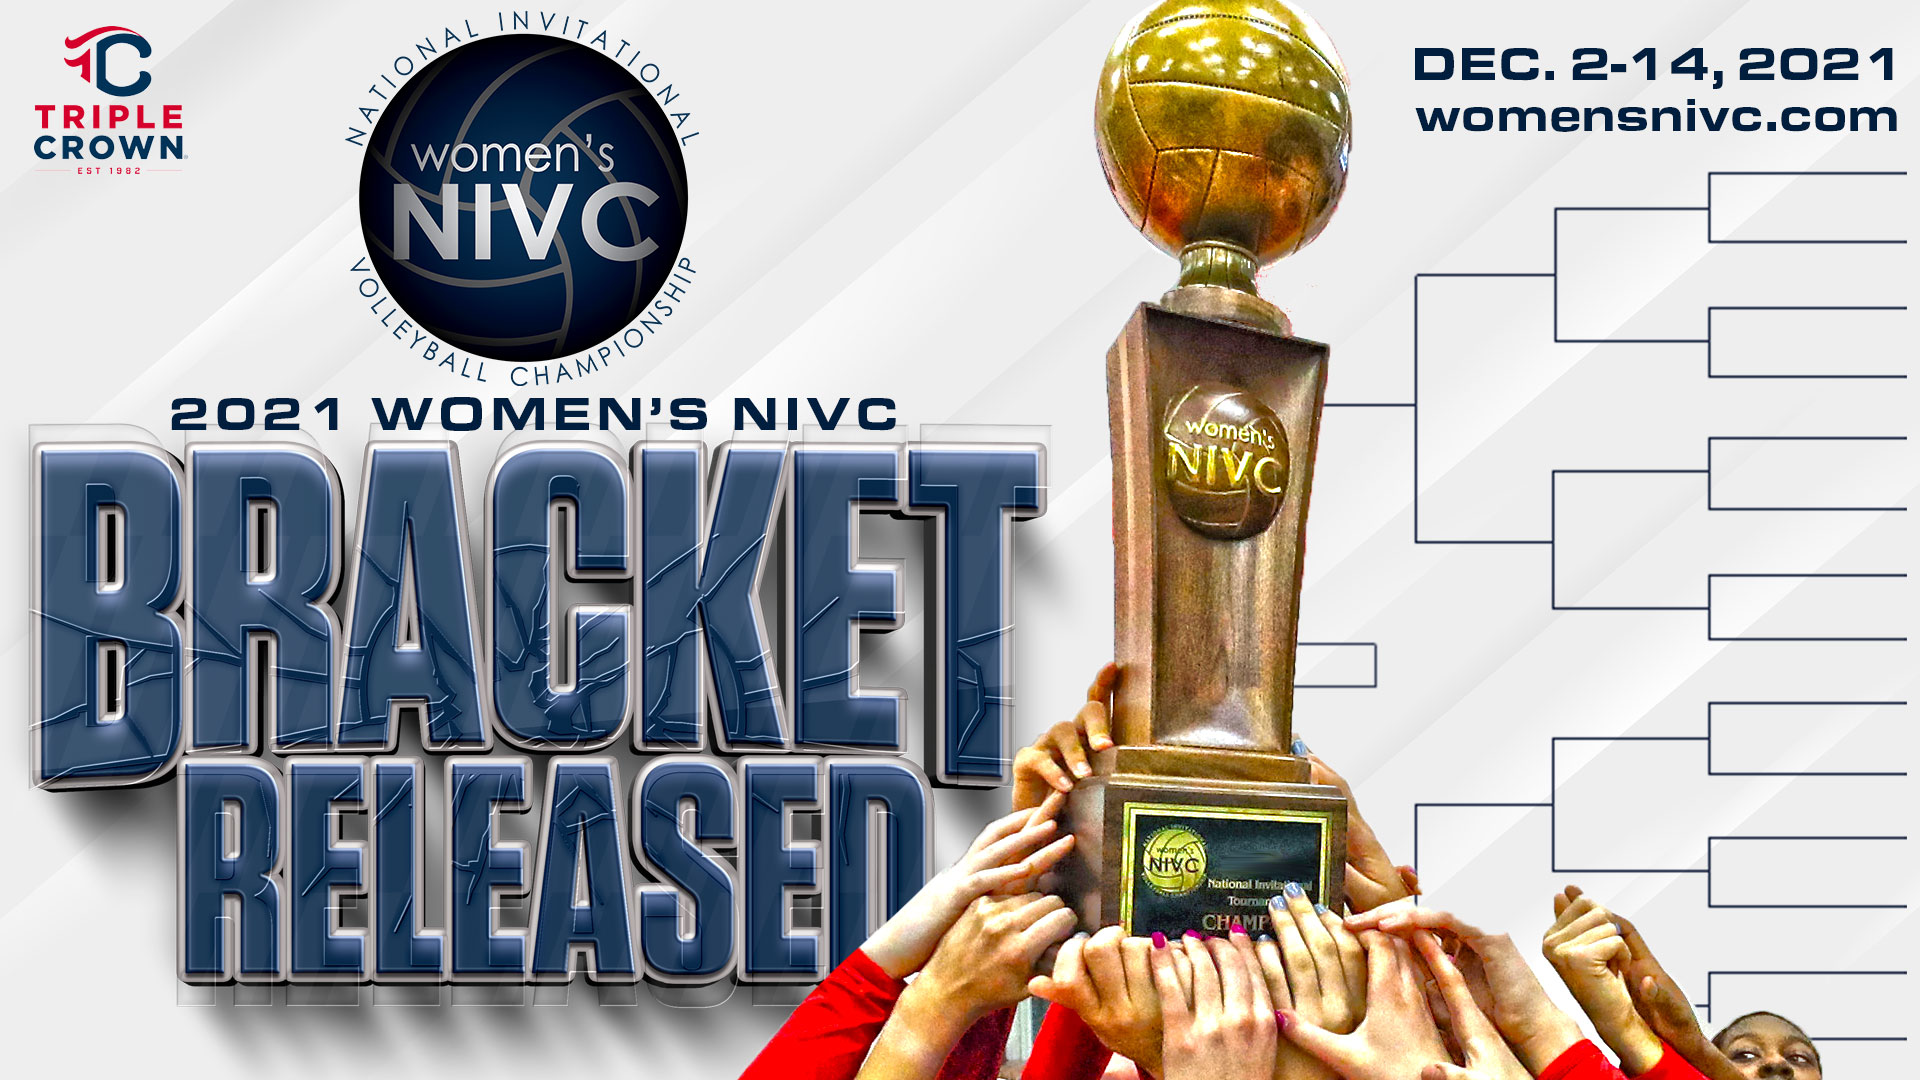 Women's NIVC on Twitter "TEAMS/BRACKET/GAMETIMES are dialed in for the